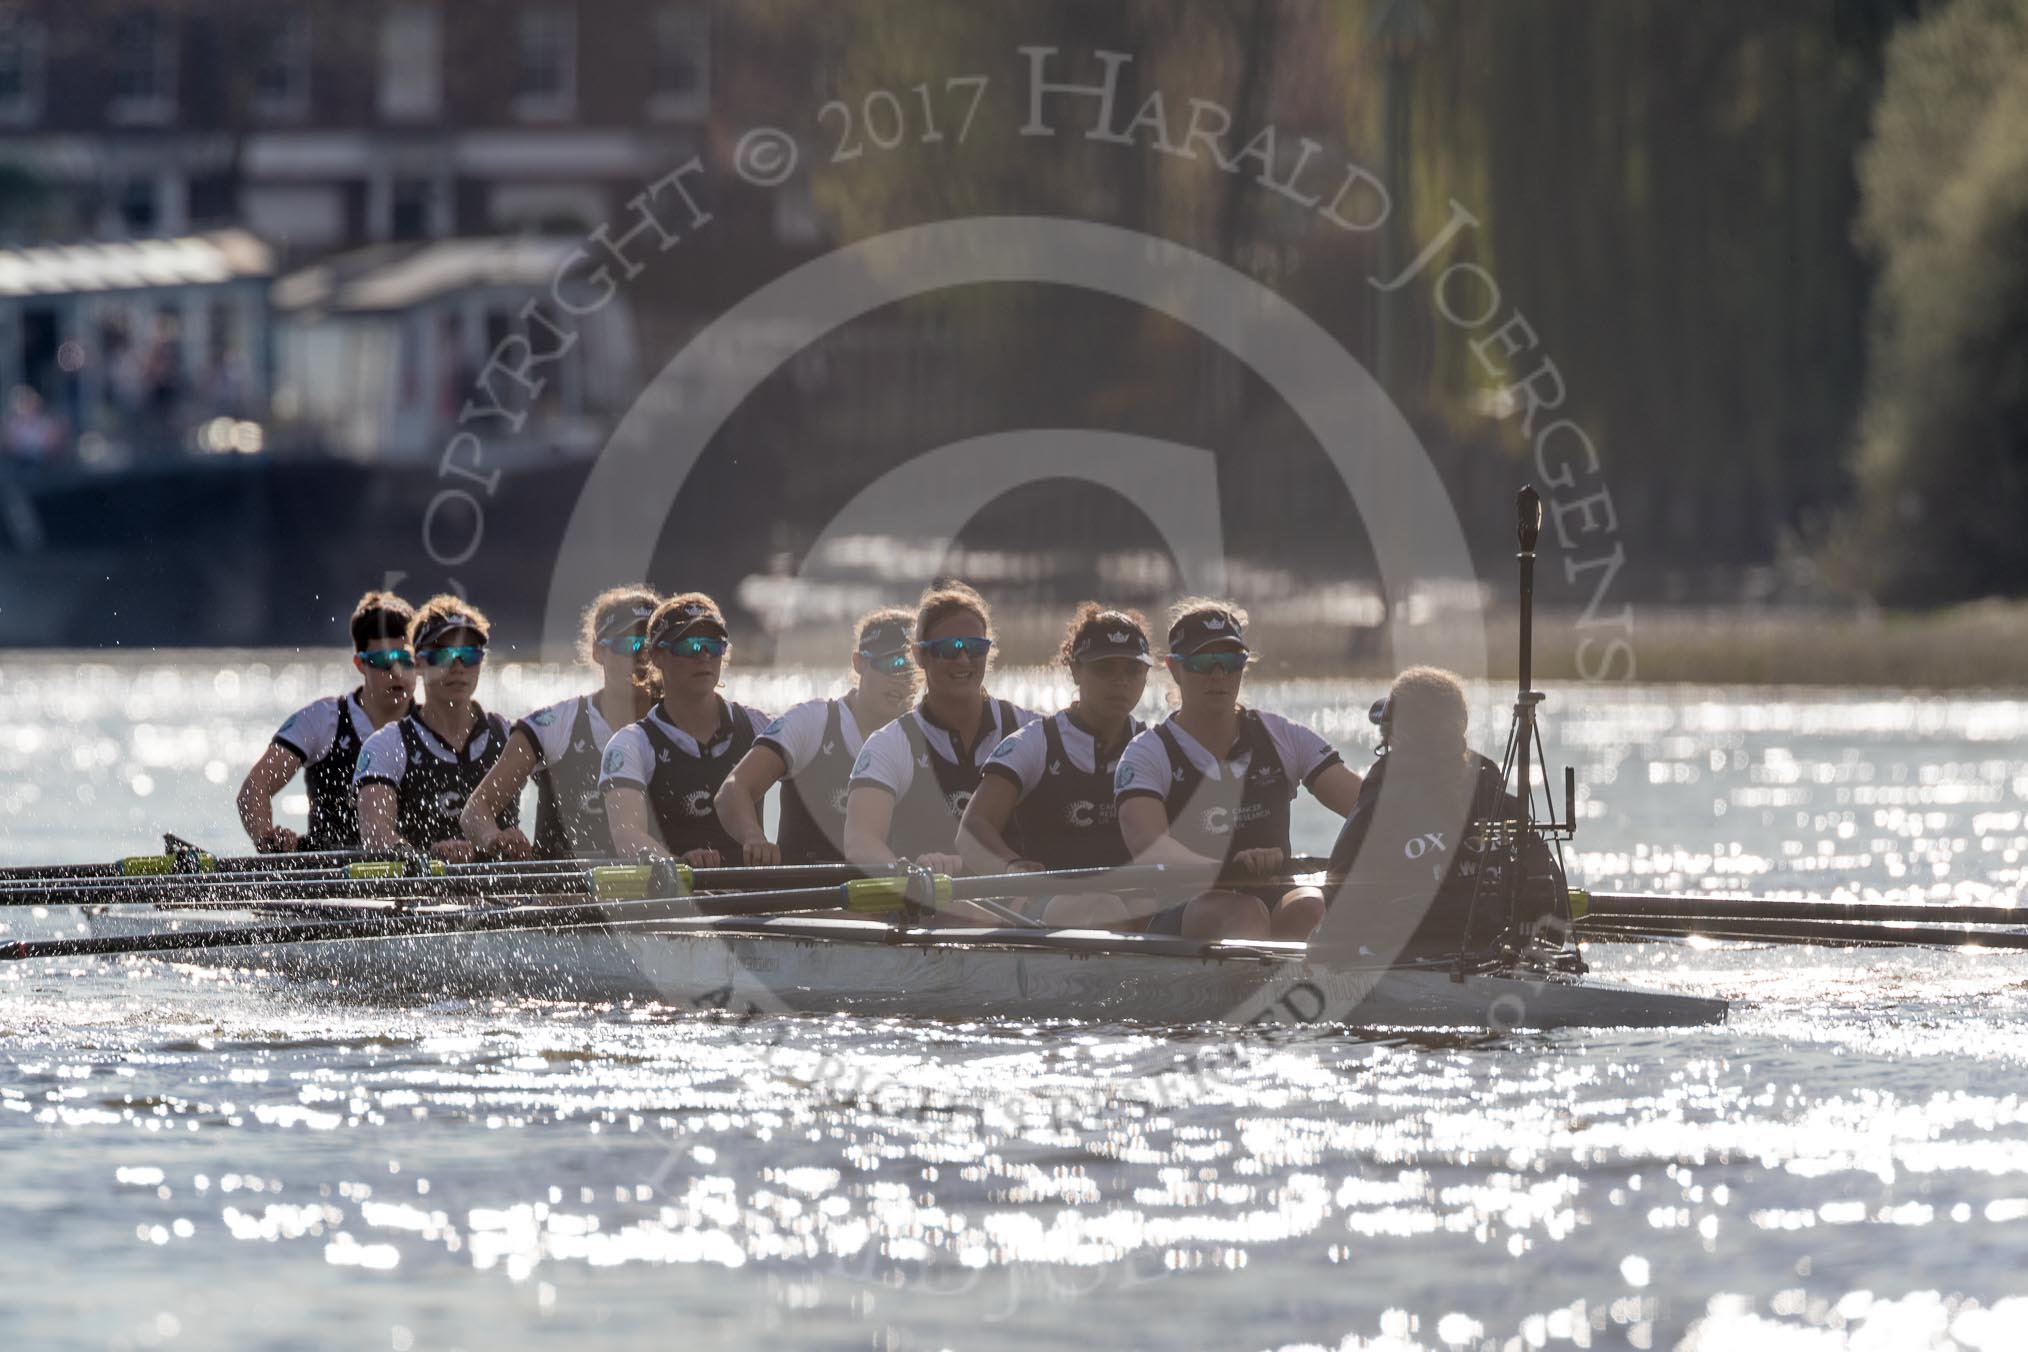 The Boat Race season 2017 -  The Cancer Research Women's Boat Race: Oxford working hard to catch up with Cambridge in the afternoon sunshine.
River Thames between Putney Bridge and Mortlake,
London SW15,

United Kingdom,
on 02 April 2017 at 16:45, image #168